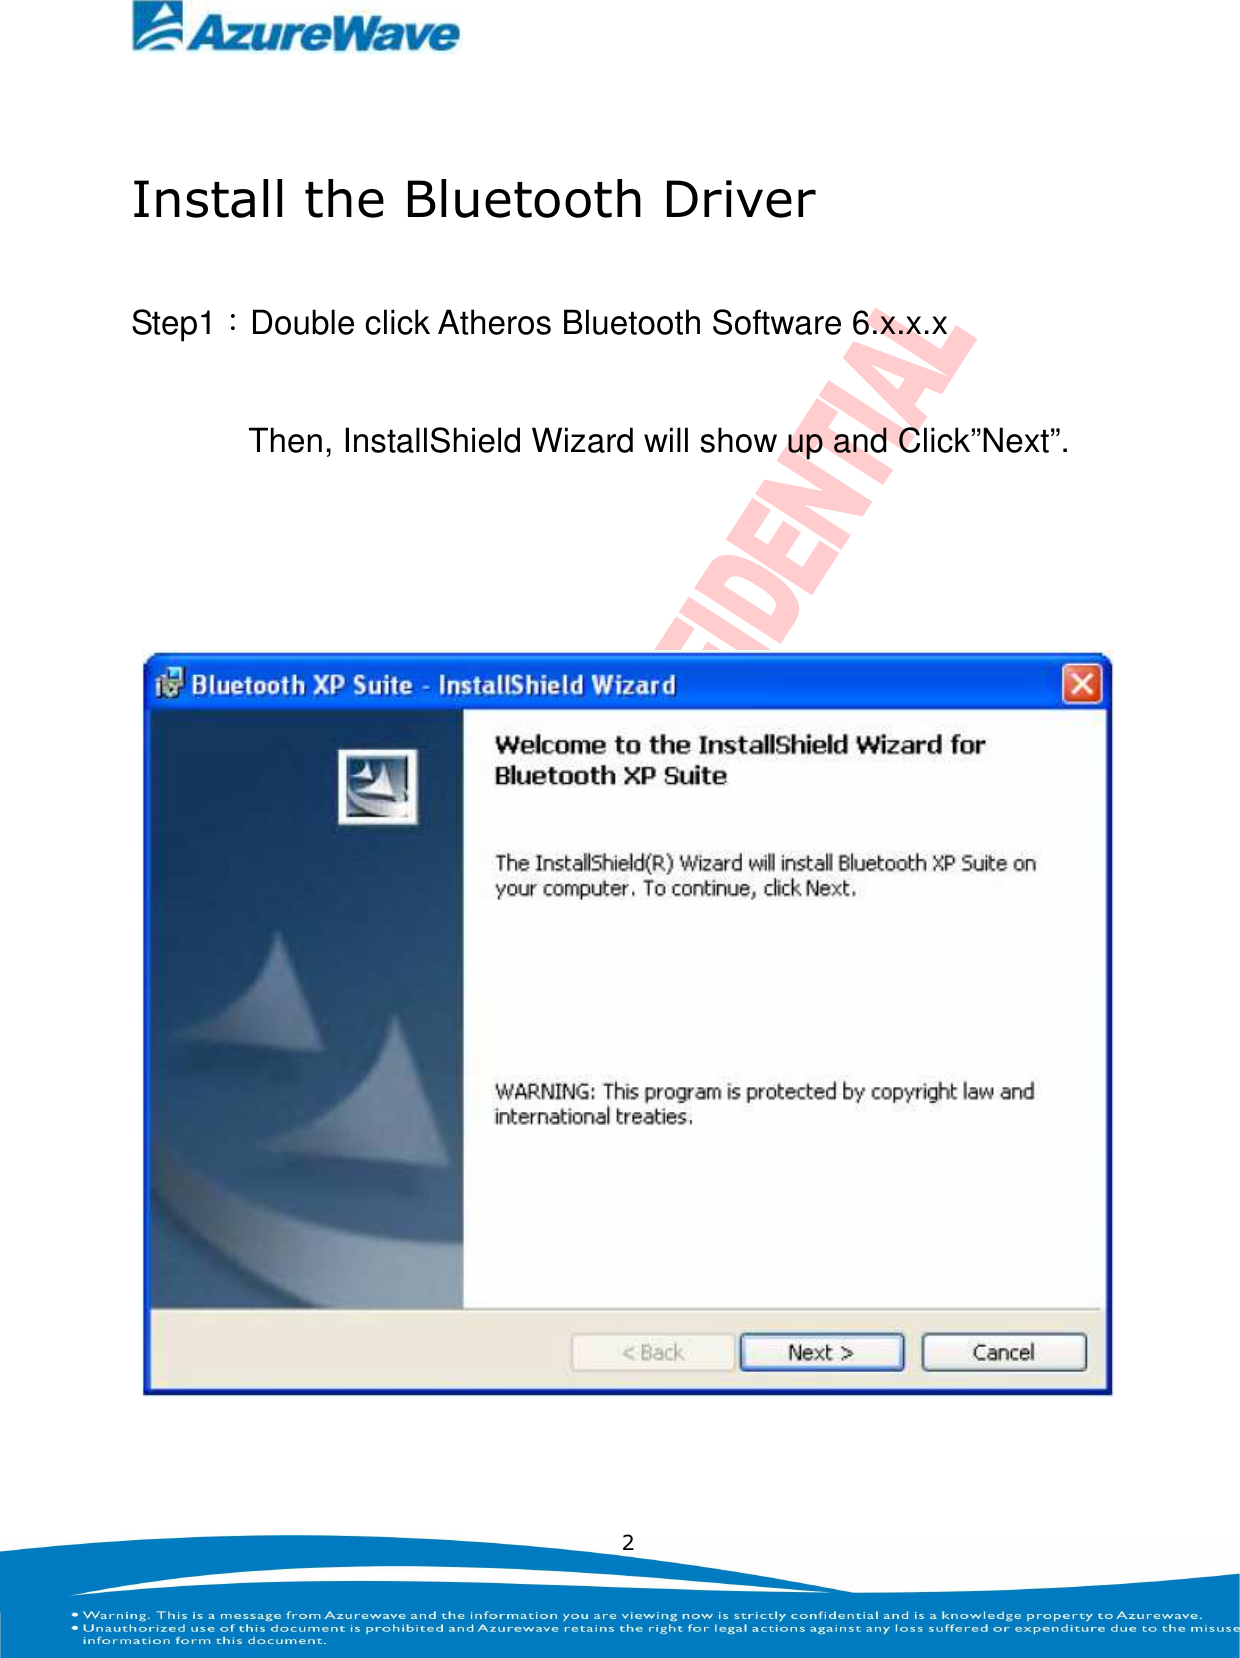    2  Install the Bluetooth Driver Step1：Double click Atheros Bluetooth Software 6.x.x.x               Then, InstallShield Wizard will show up and Click”Next”.   